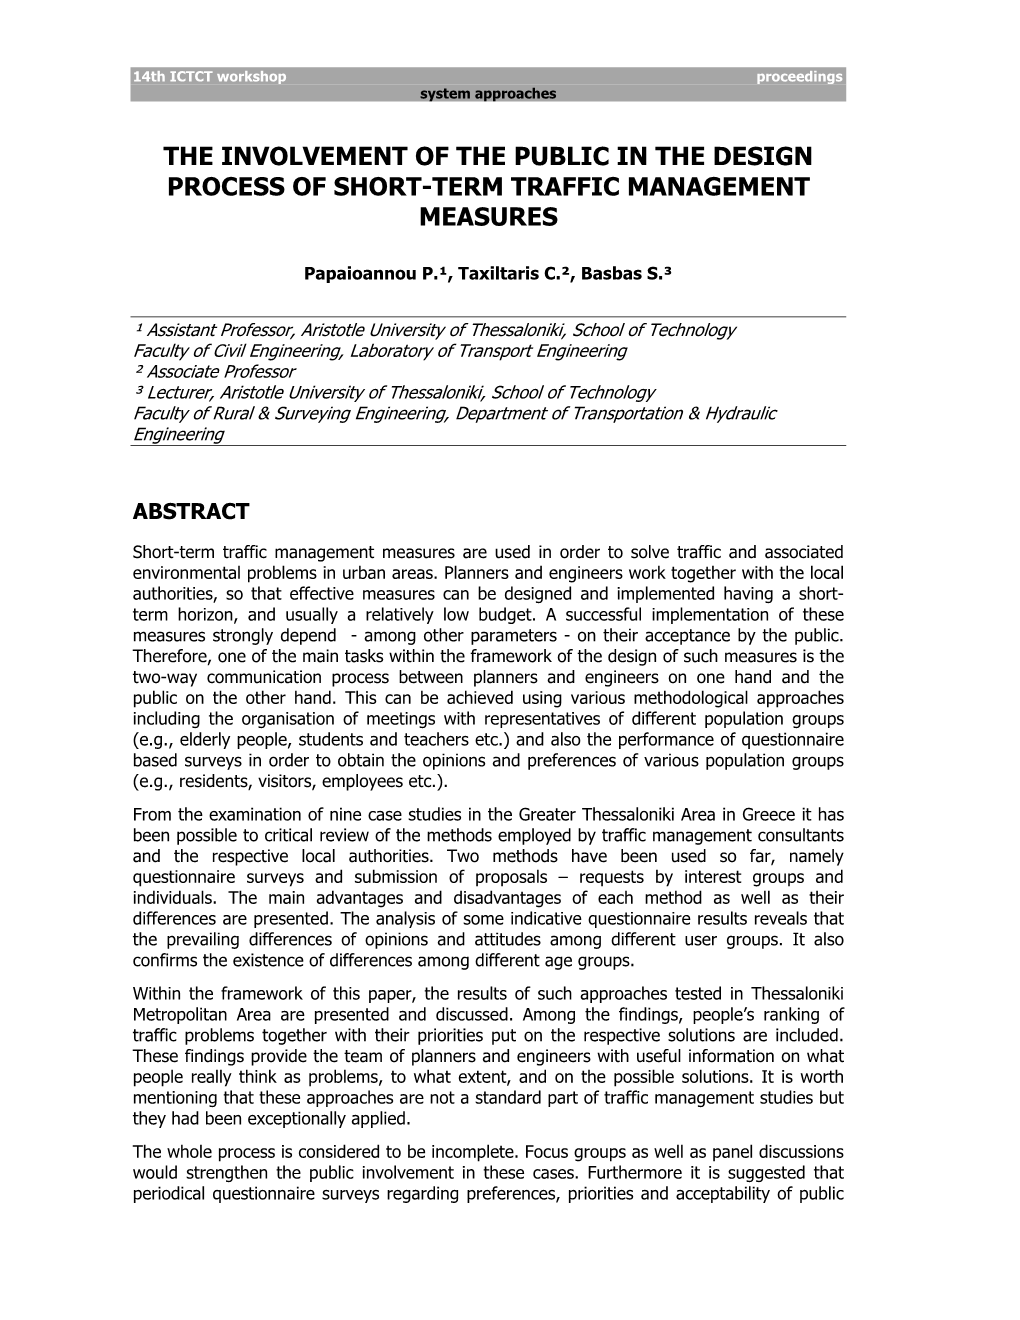 The Involvement of the Public in the Design Process of Short-Term Traffic Management Measures